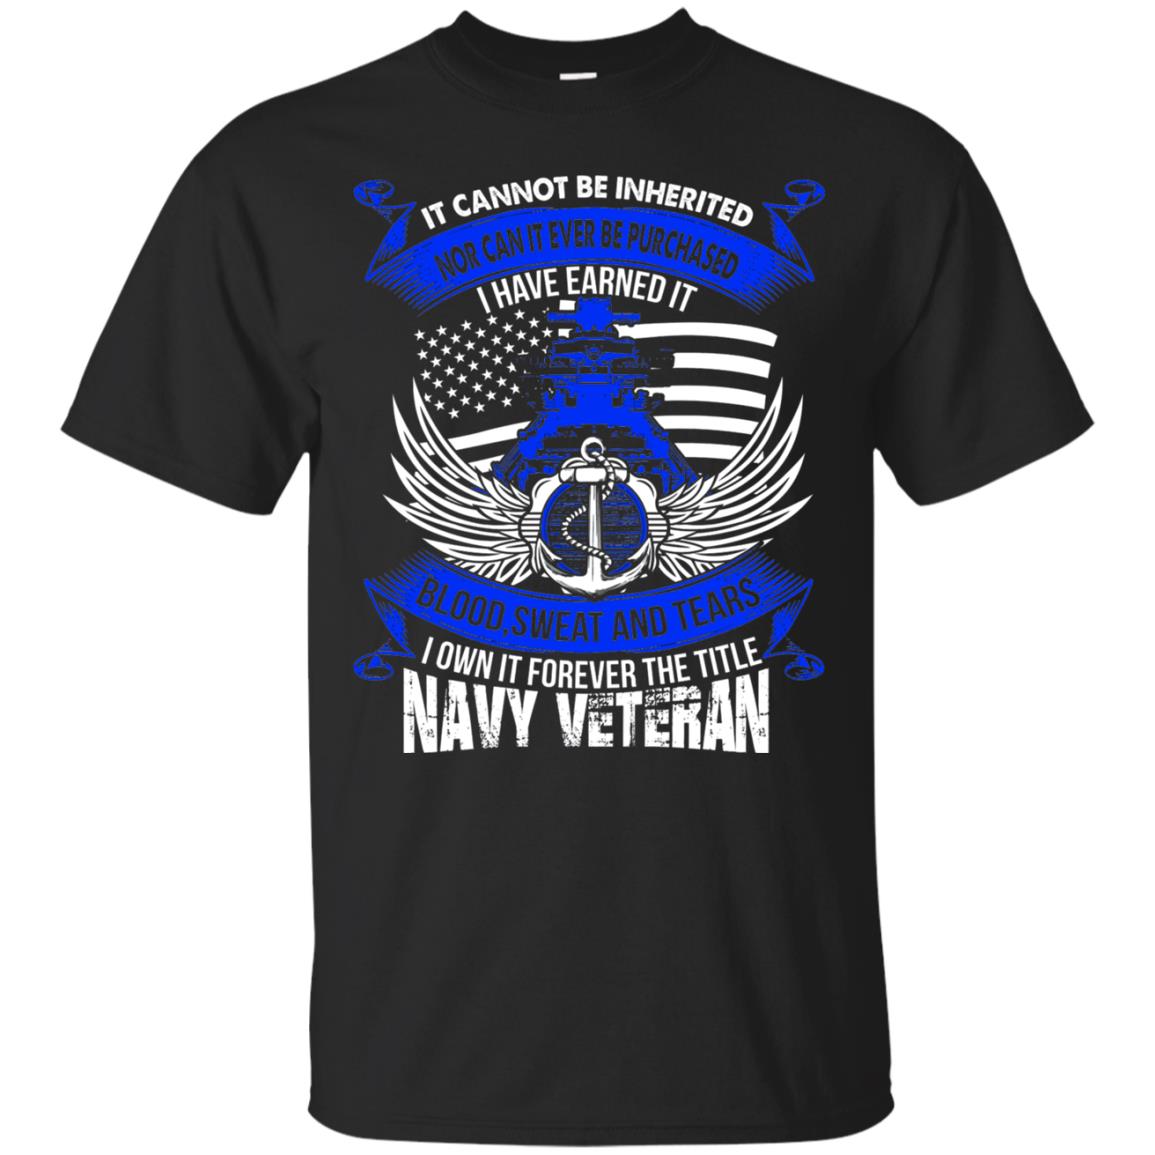 It Cannot Be Inherited Nor Can It Ever Be Purchased I Have Earned It Blood Sweat And Tears I Own It Forever The Title Navy Veteran